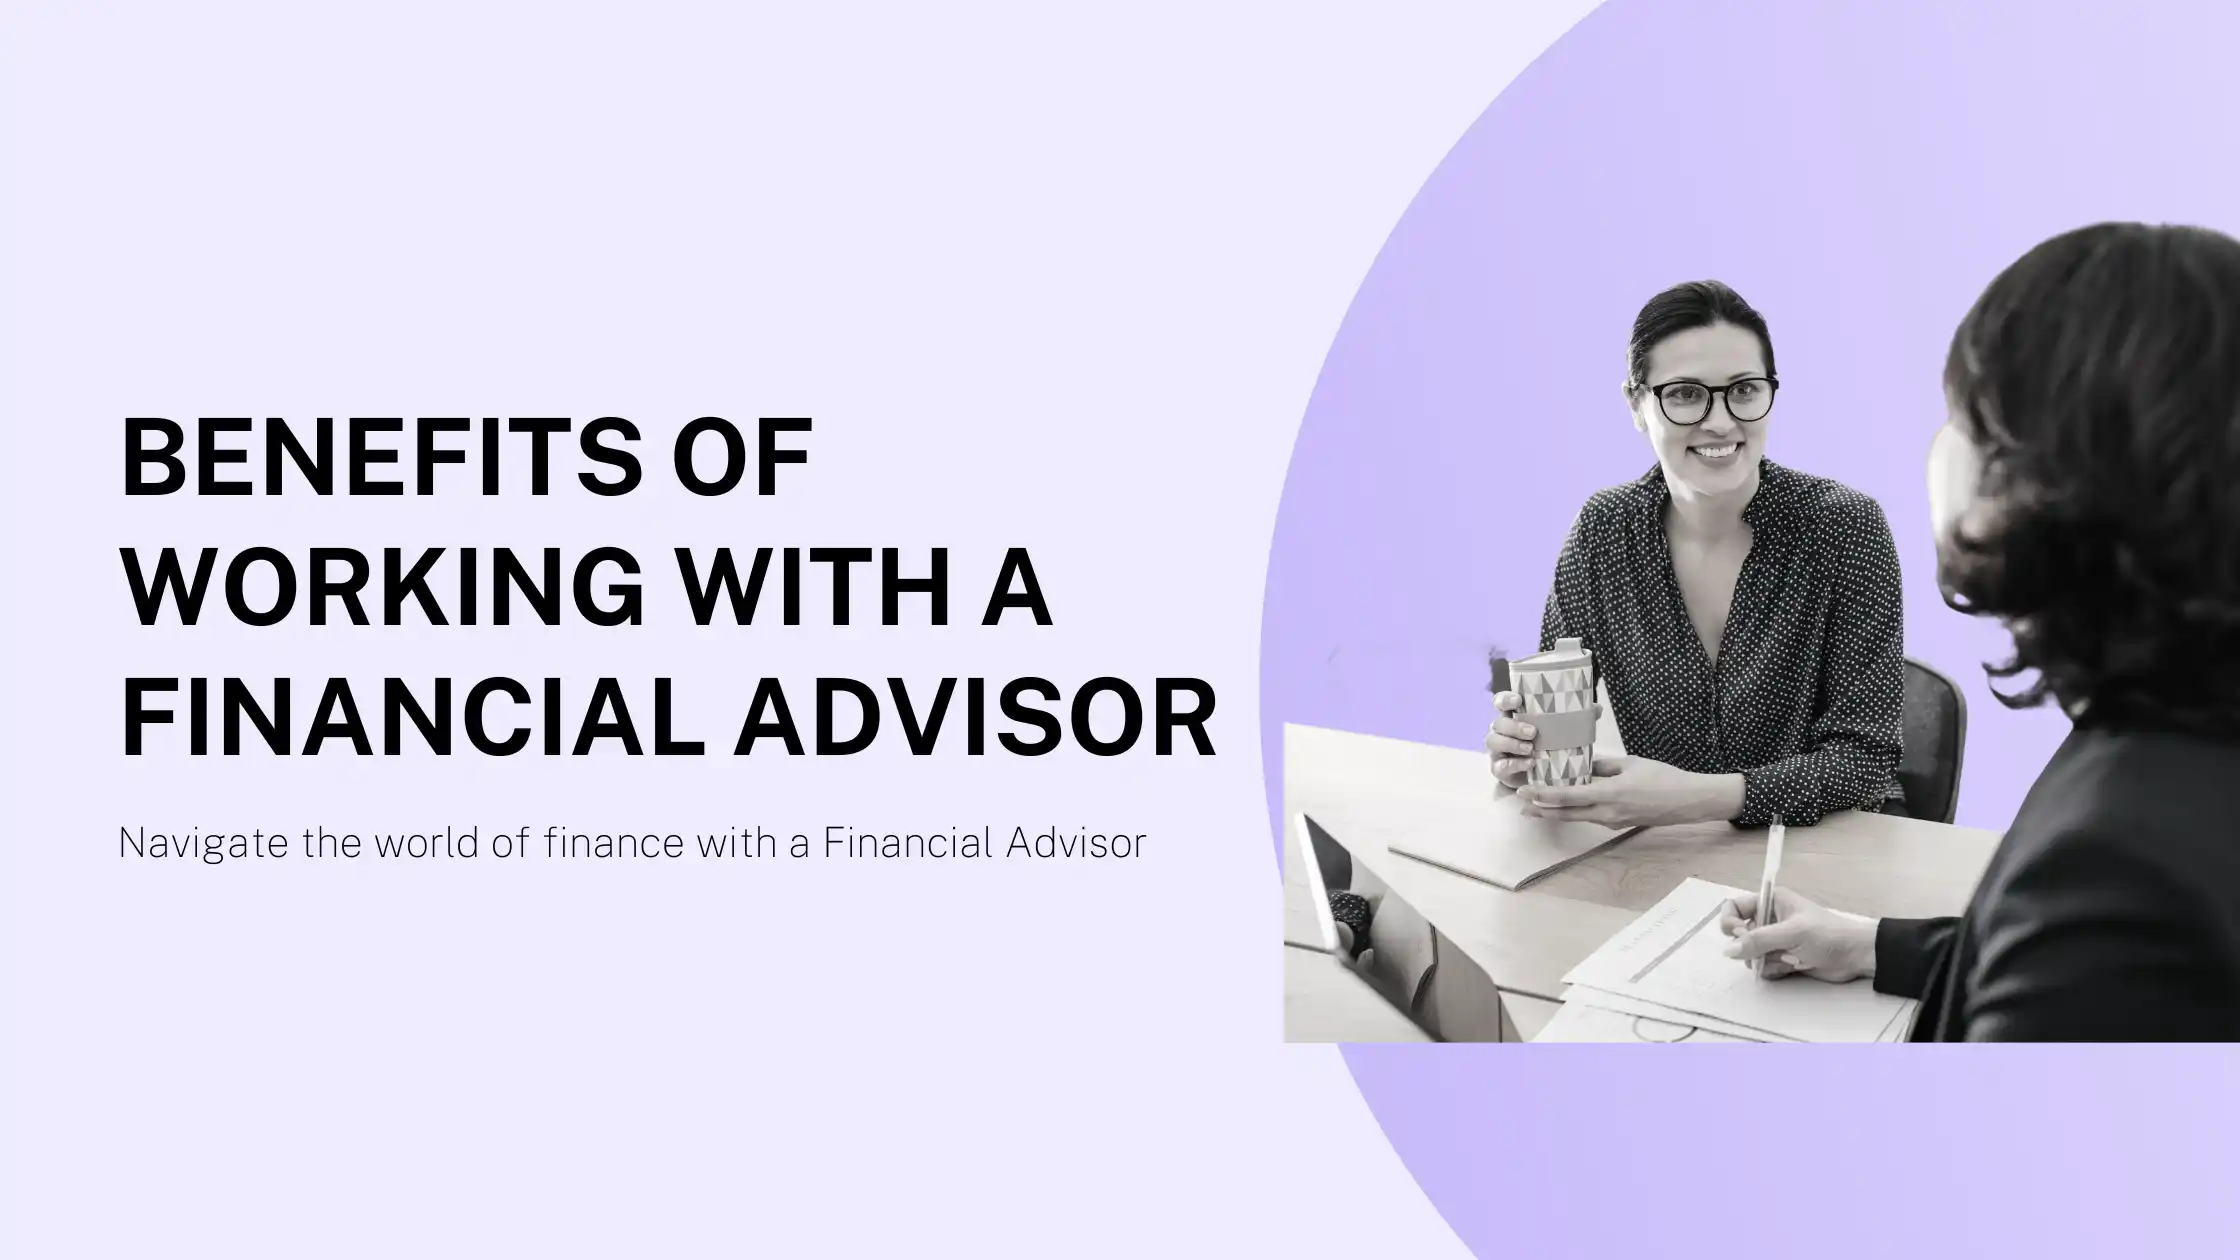 The Benefits of Working with a Financial Advisor